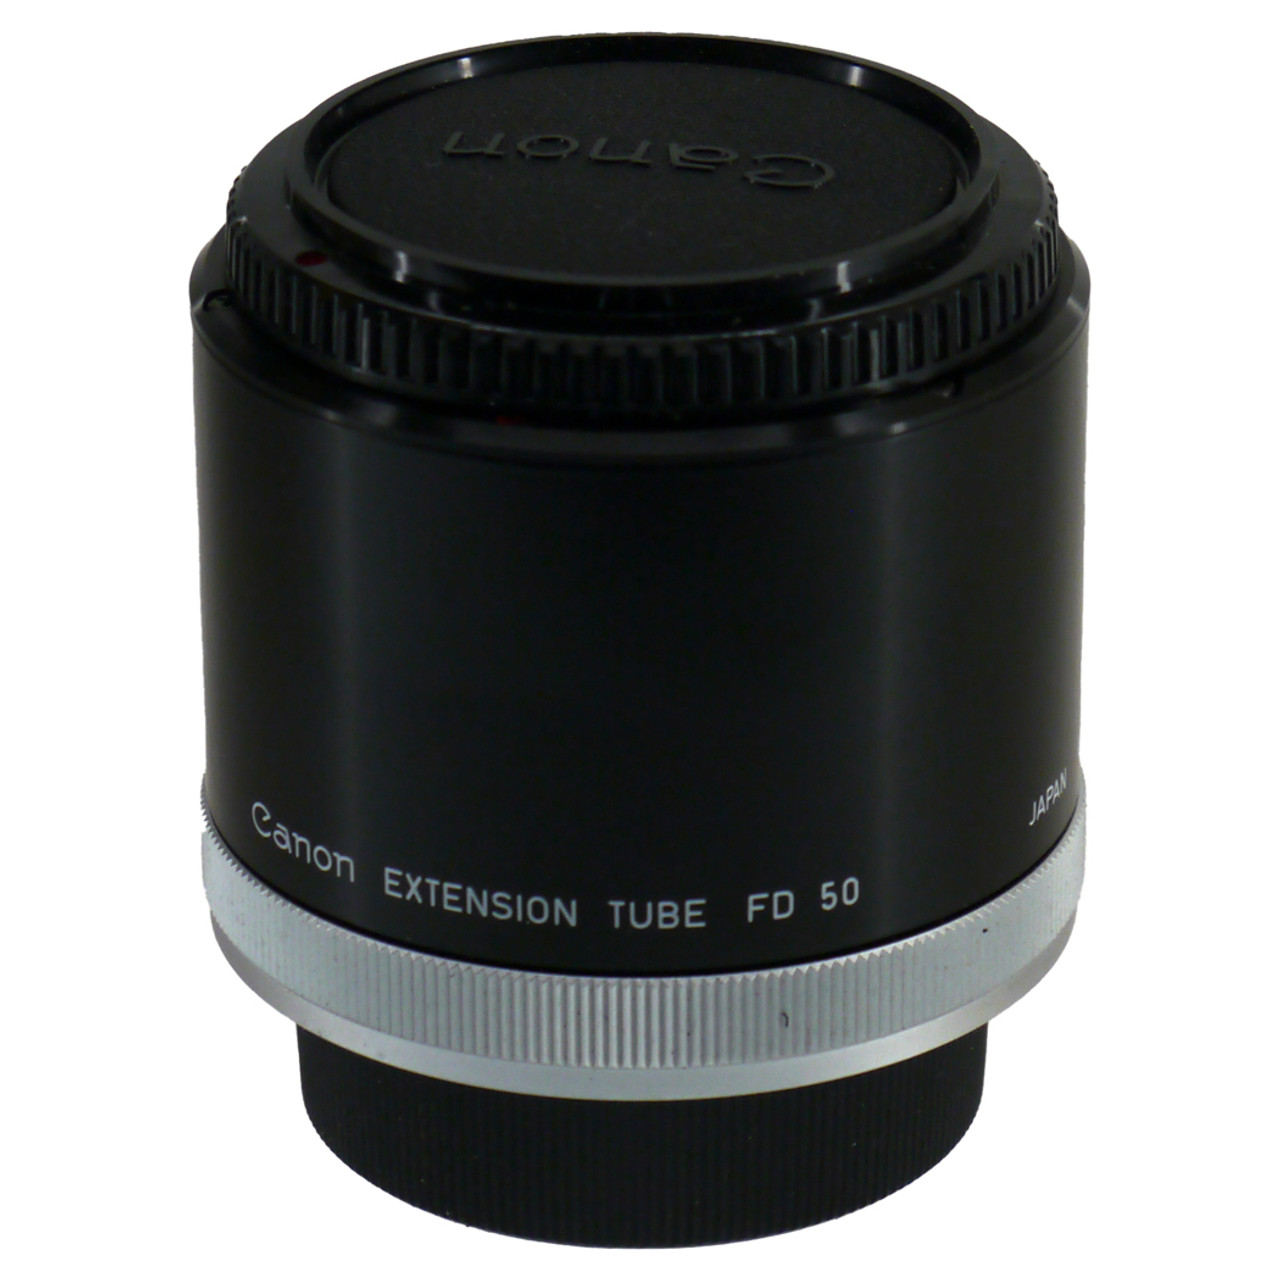 USED CANON FD EXTENSION TUBE 50